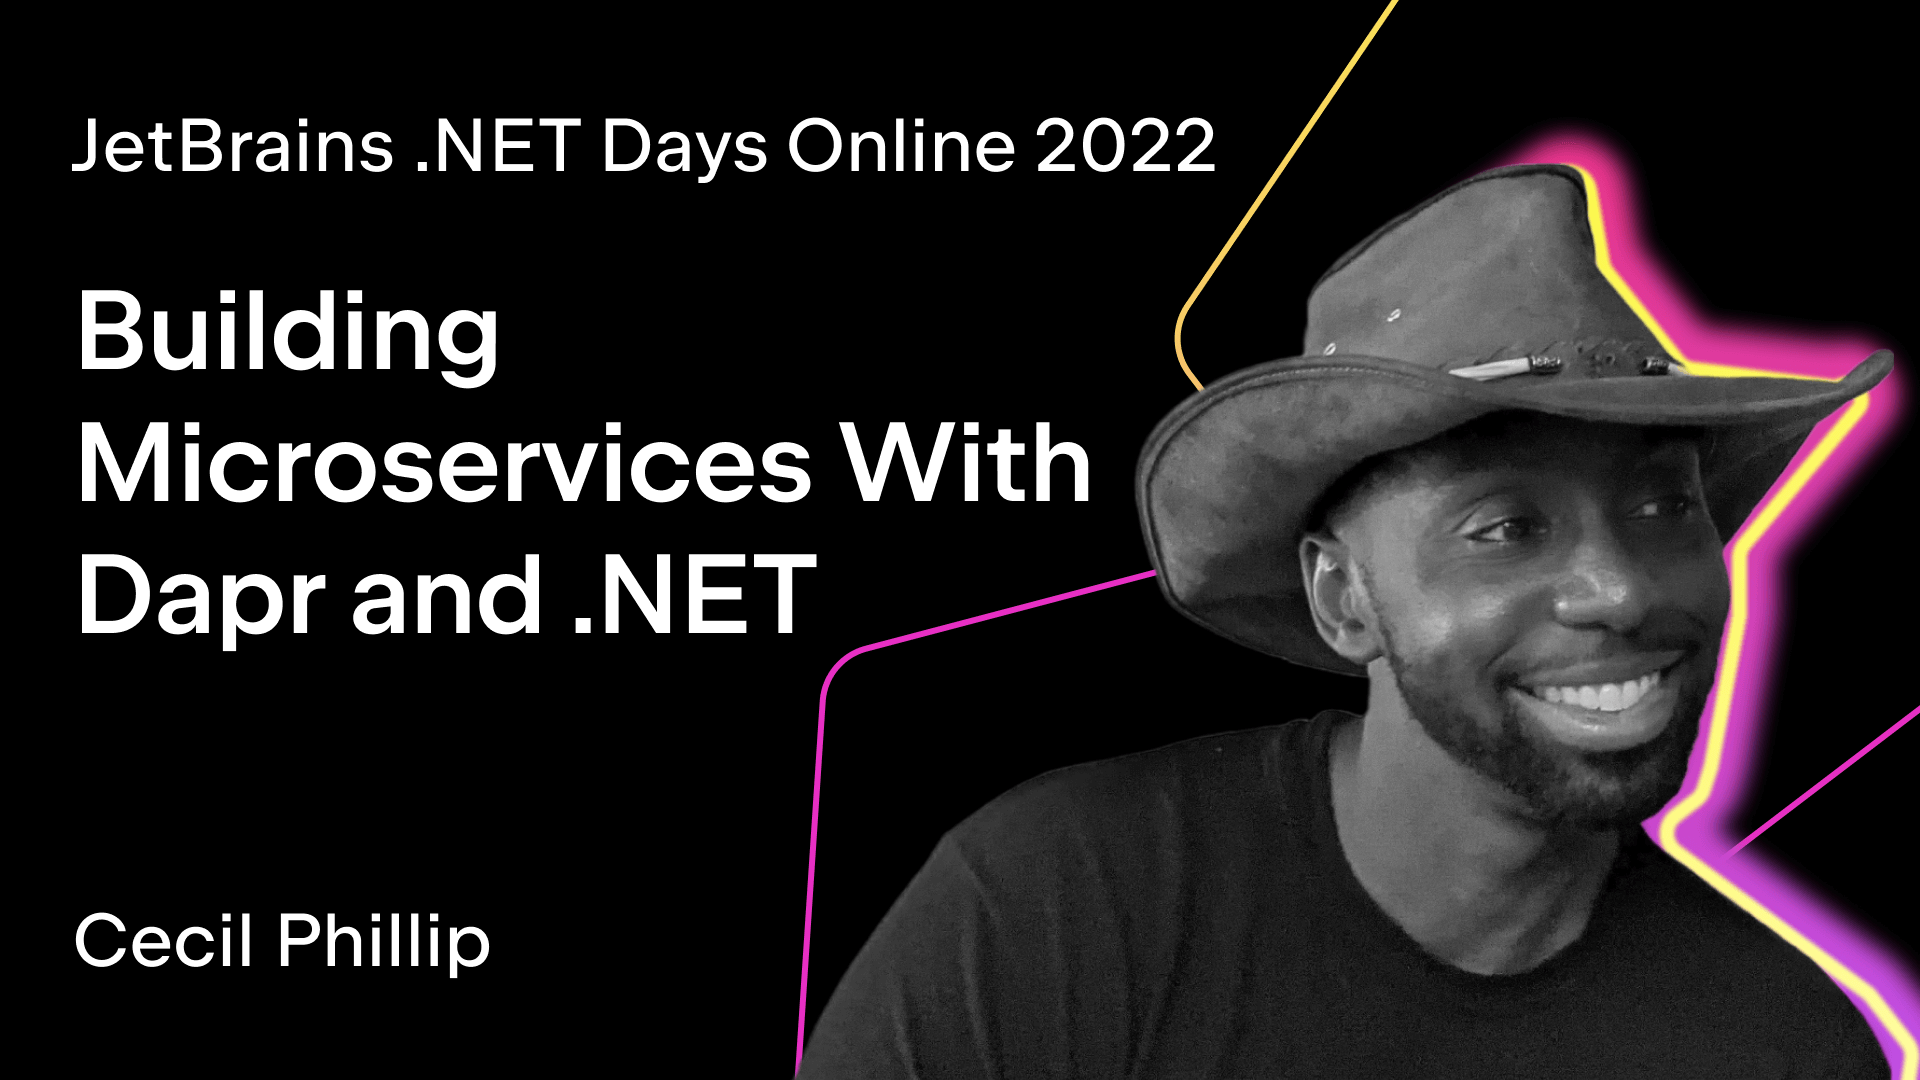 Building Microservices with Dapr and .NET